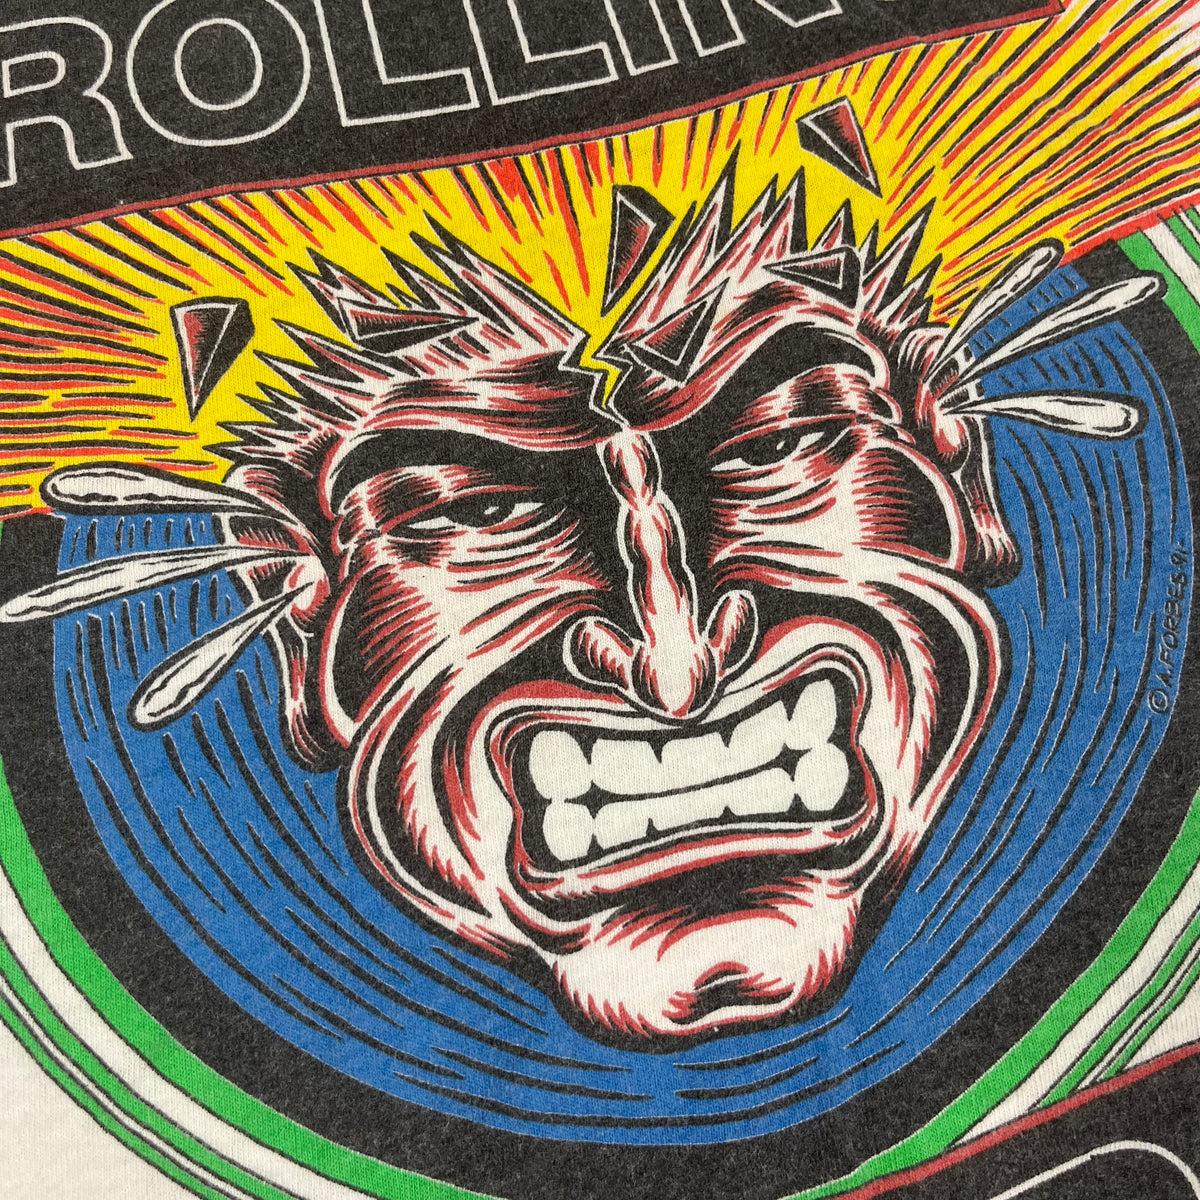 Vintage Rollins Band &quot;The End Of Silence&quot; T-Shirt